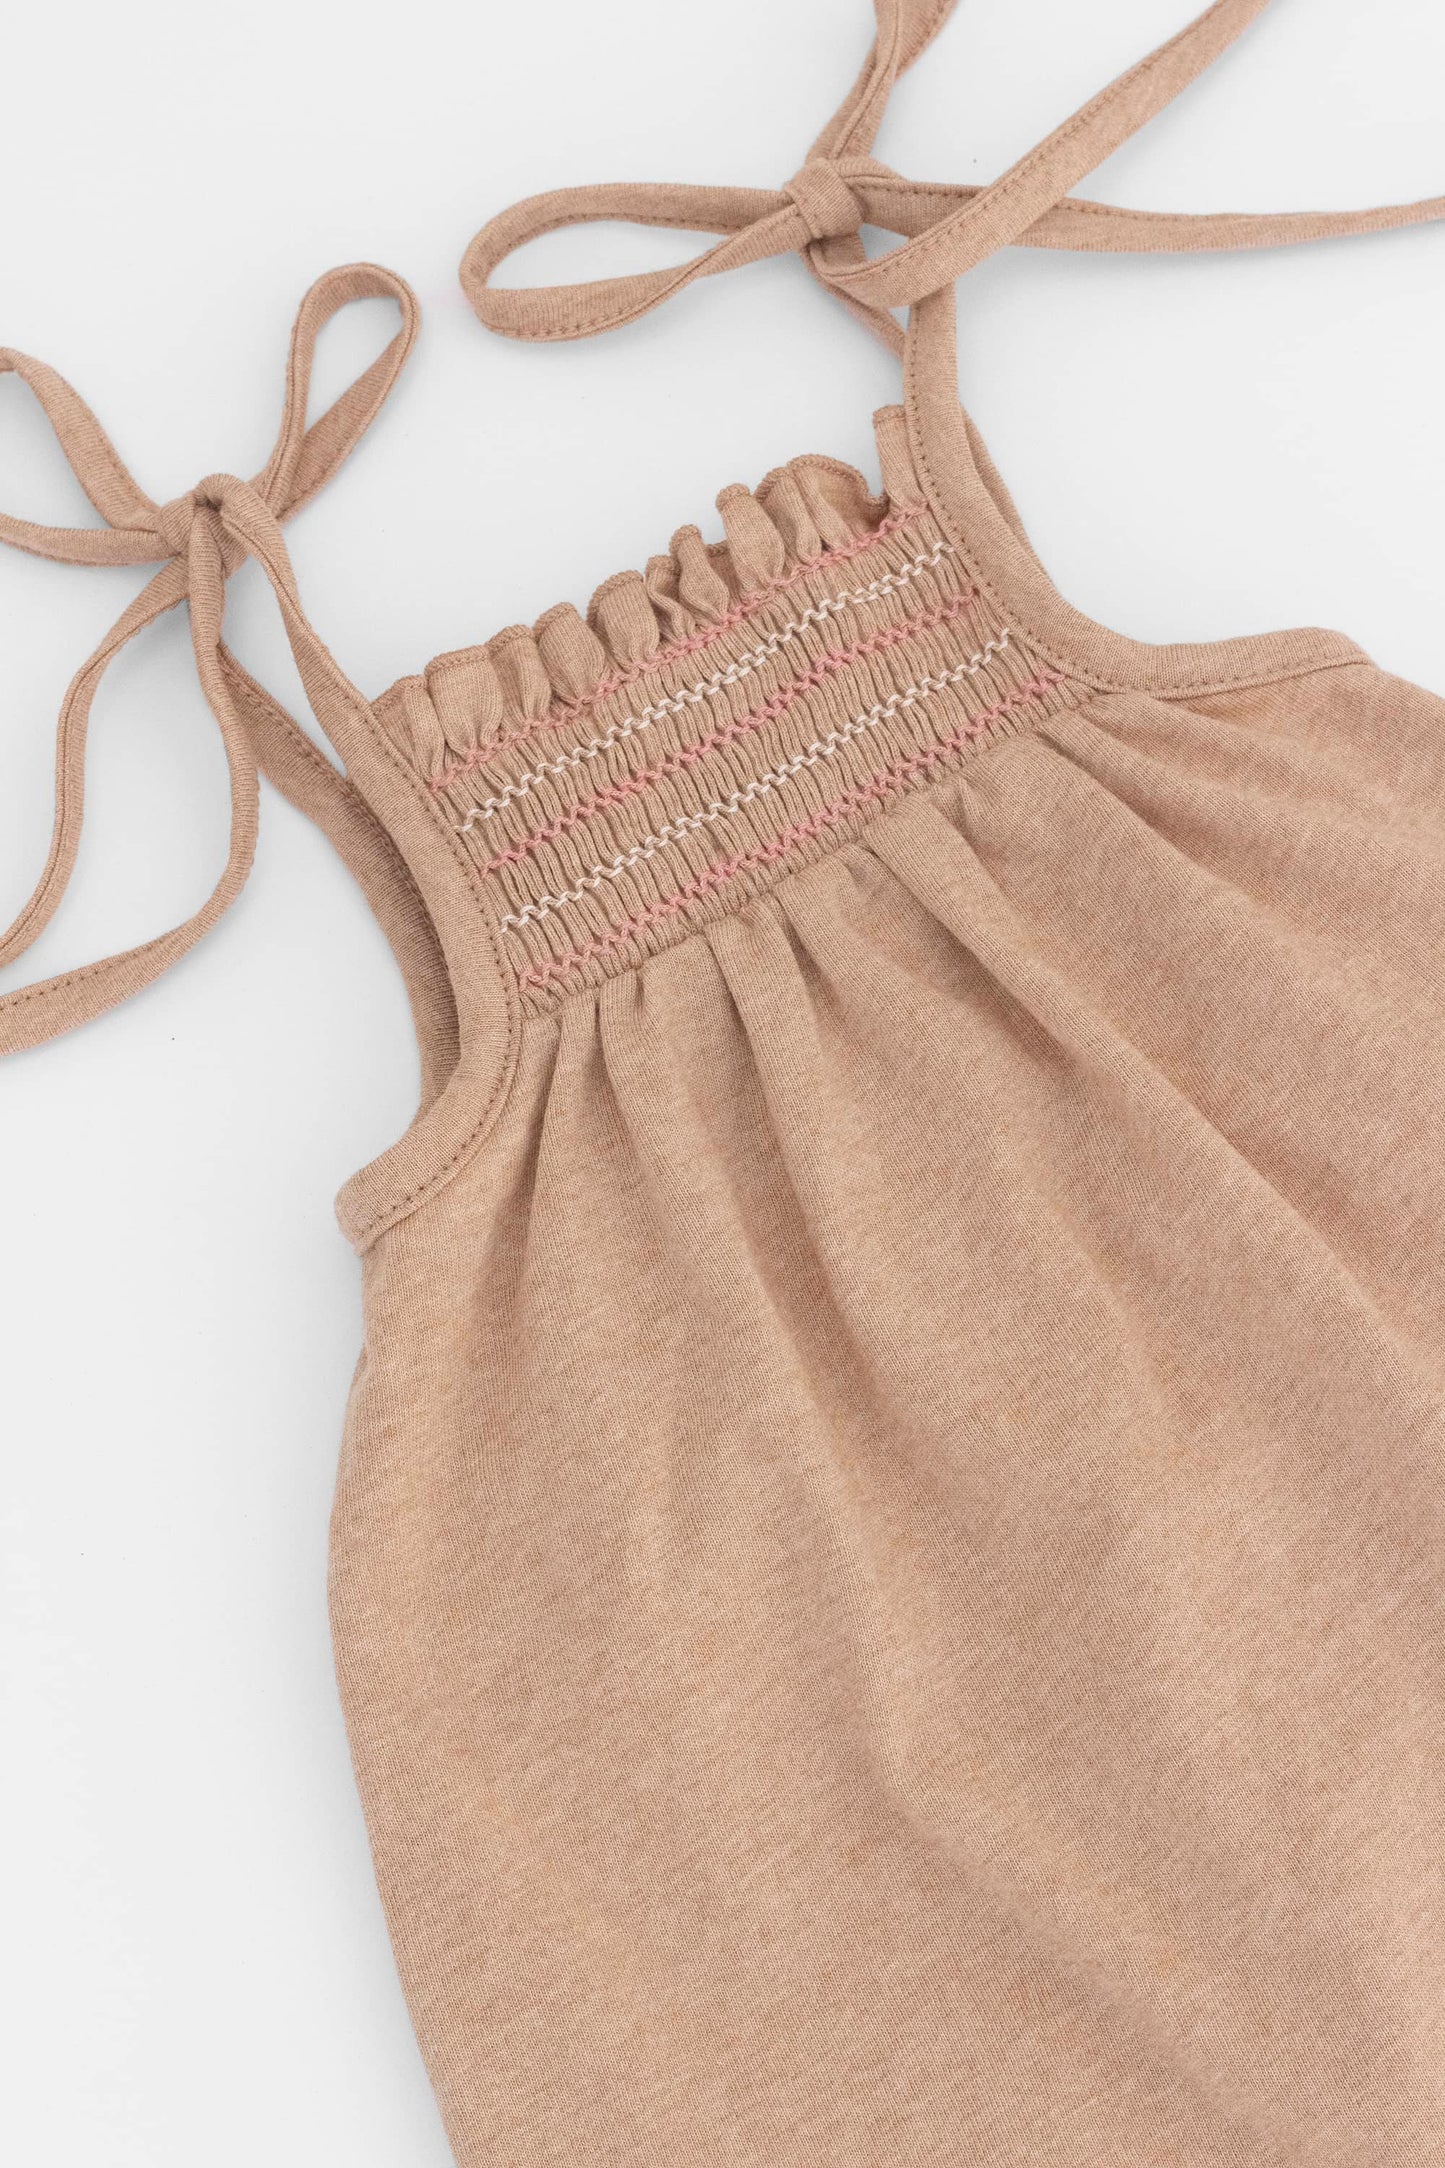 Smocked caramel organic romper with straps and embroidery